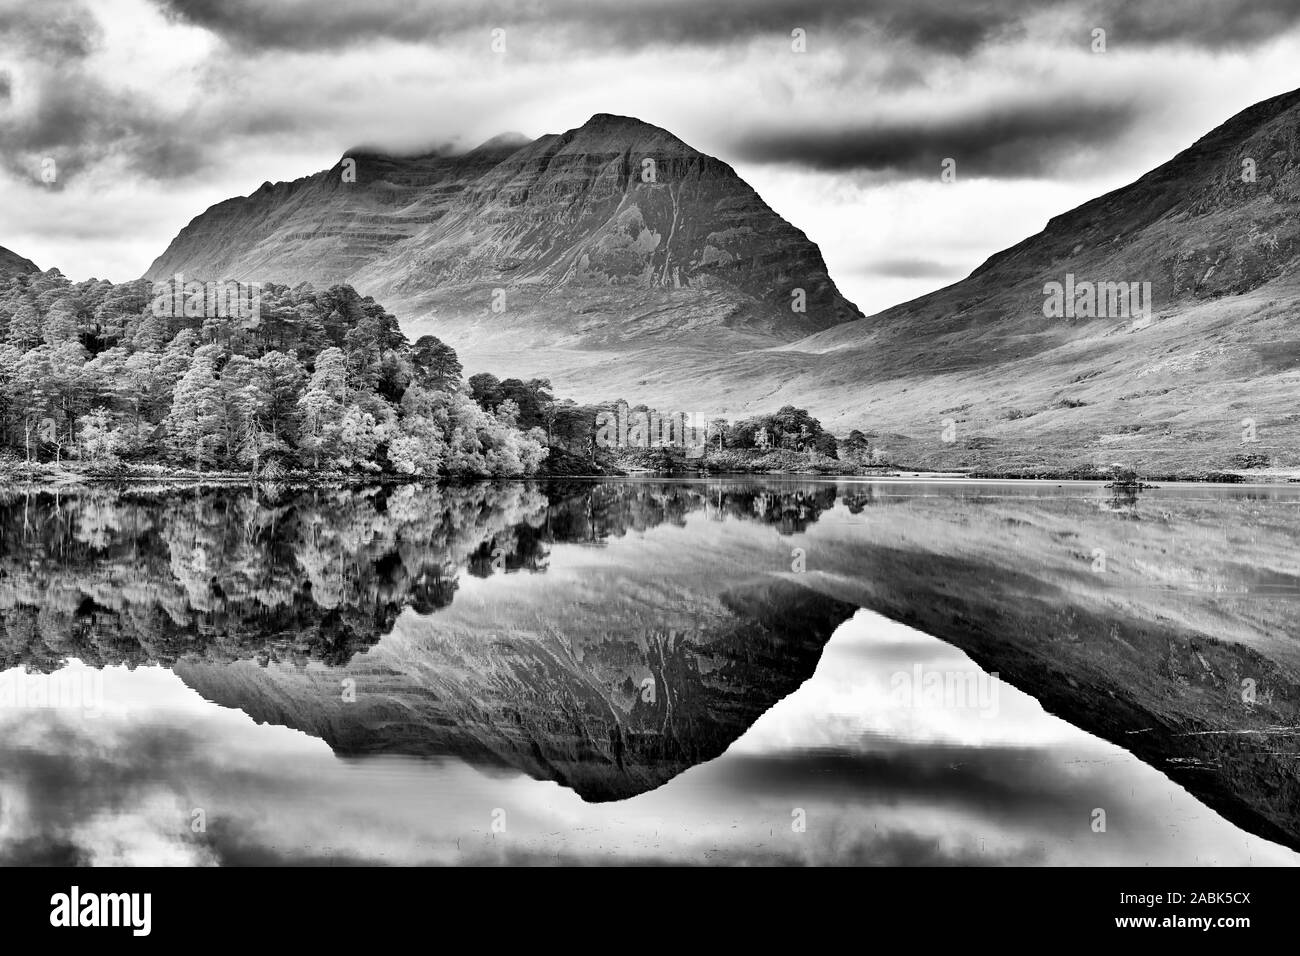 Liathach reflected in Loch Clair, Torridon, Wester Ross, Highland, Scotland.  Black and white. Stock Photo